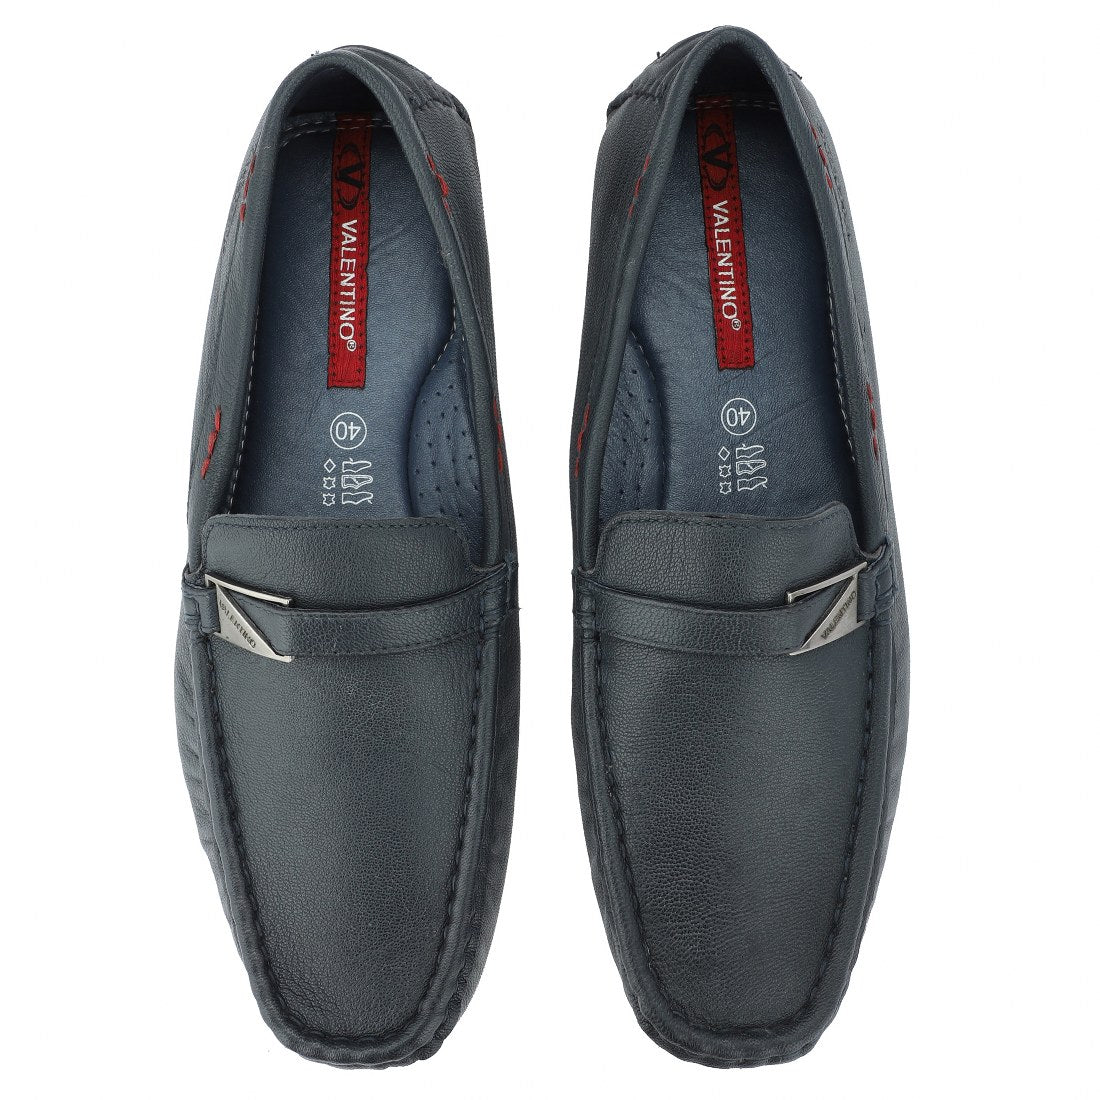 EMPORIO-26 MEN LEATHER BLUE CASUAL SLIP ON DRIVING